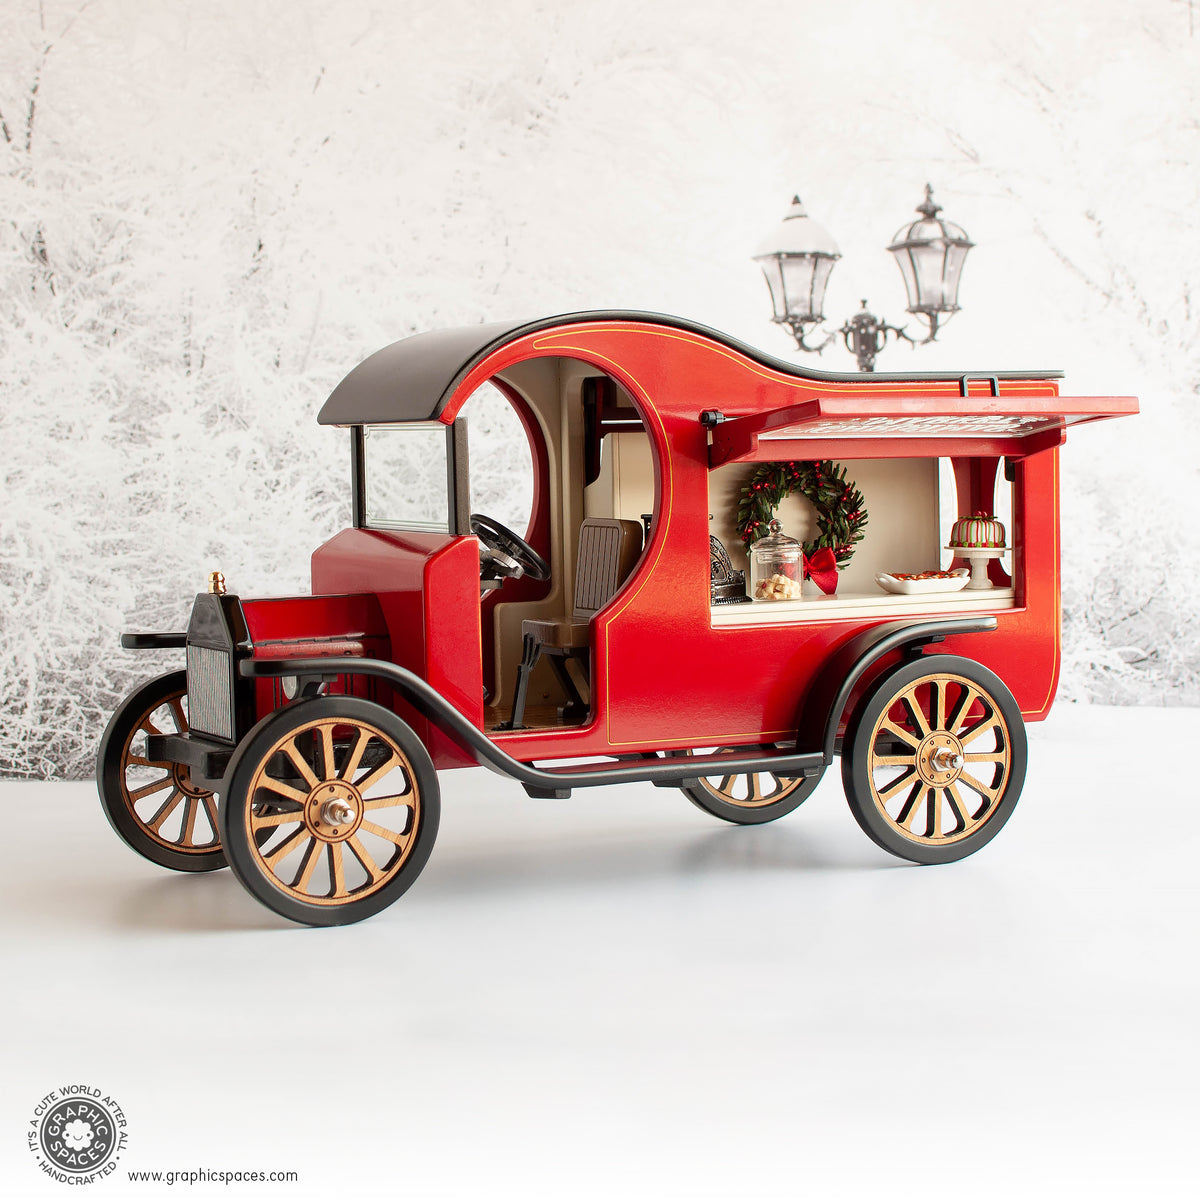 1 :12 Scale Room Box Red Christmas Market Truck Model T C cab. Driver side Counter view. Window open. Front cab detailed.